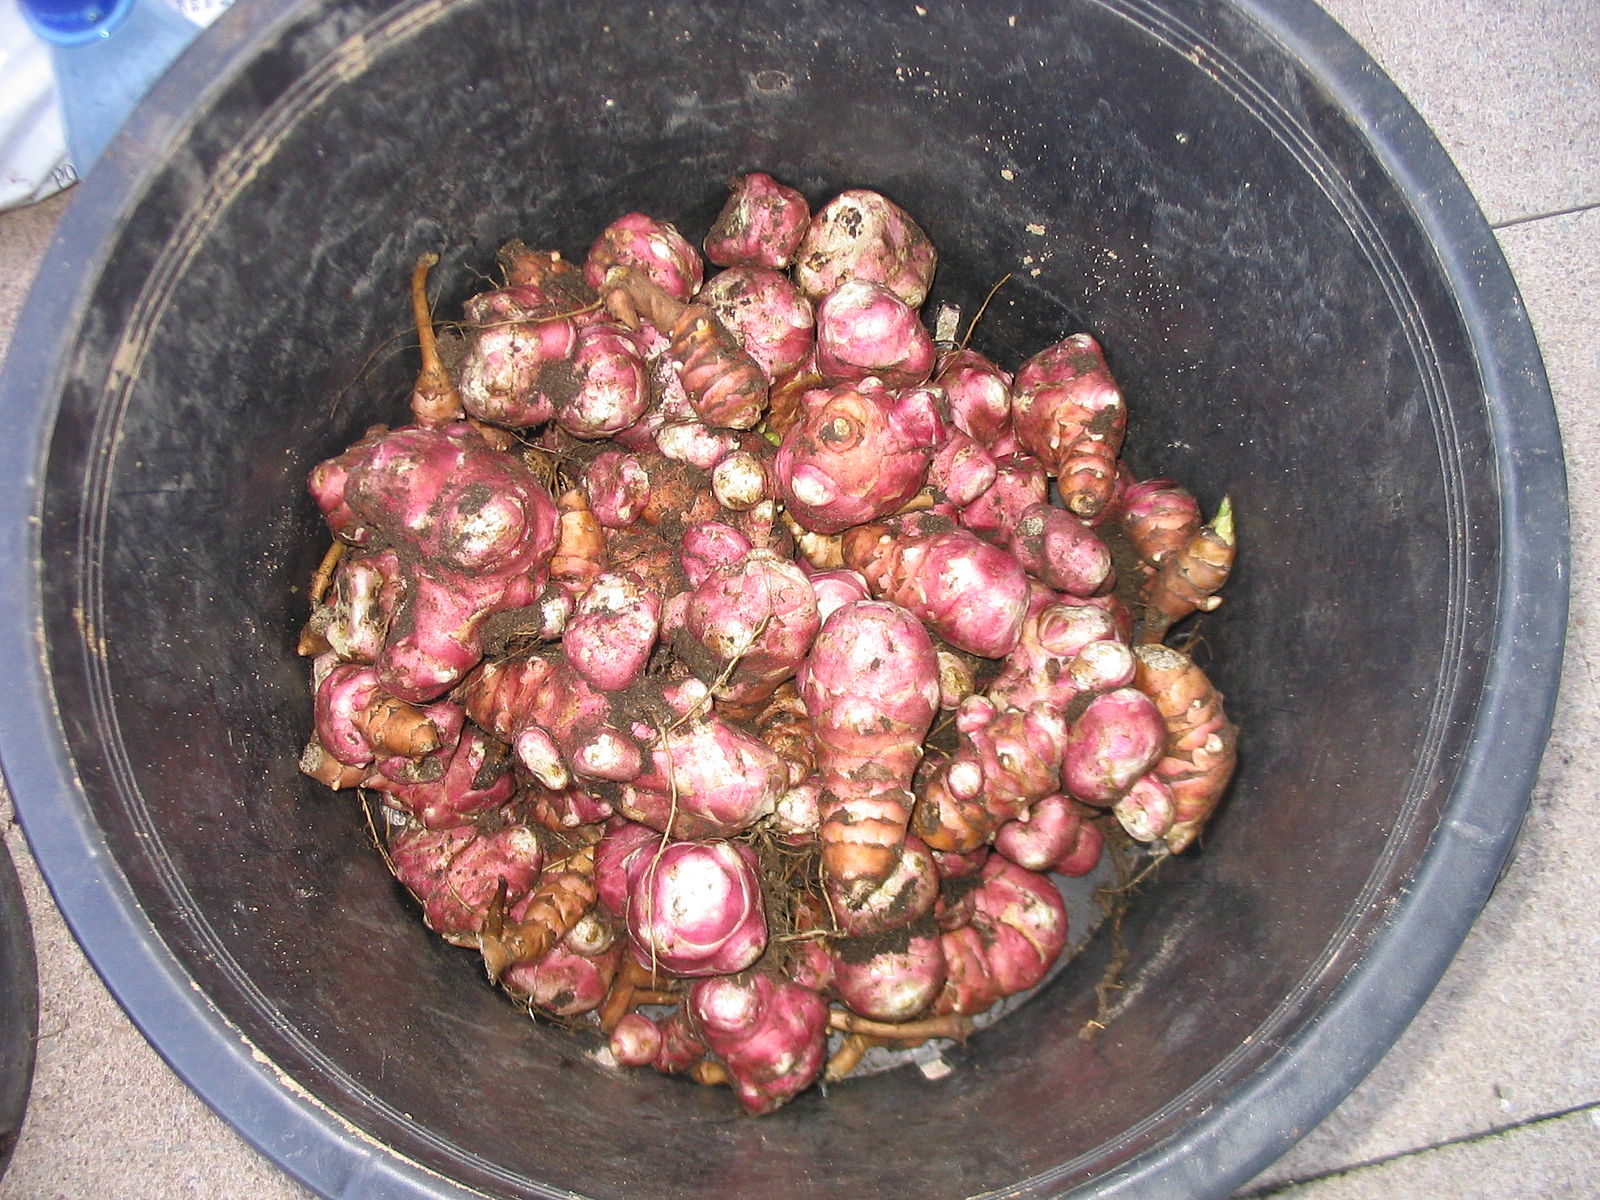 A pot of the tubers